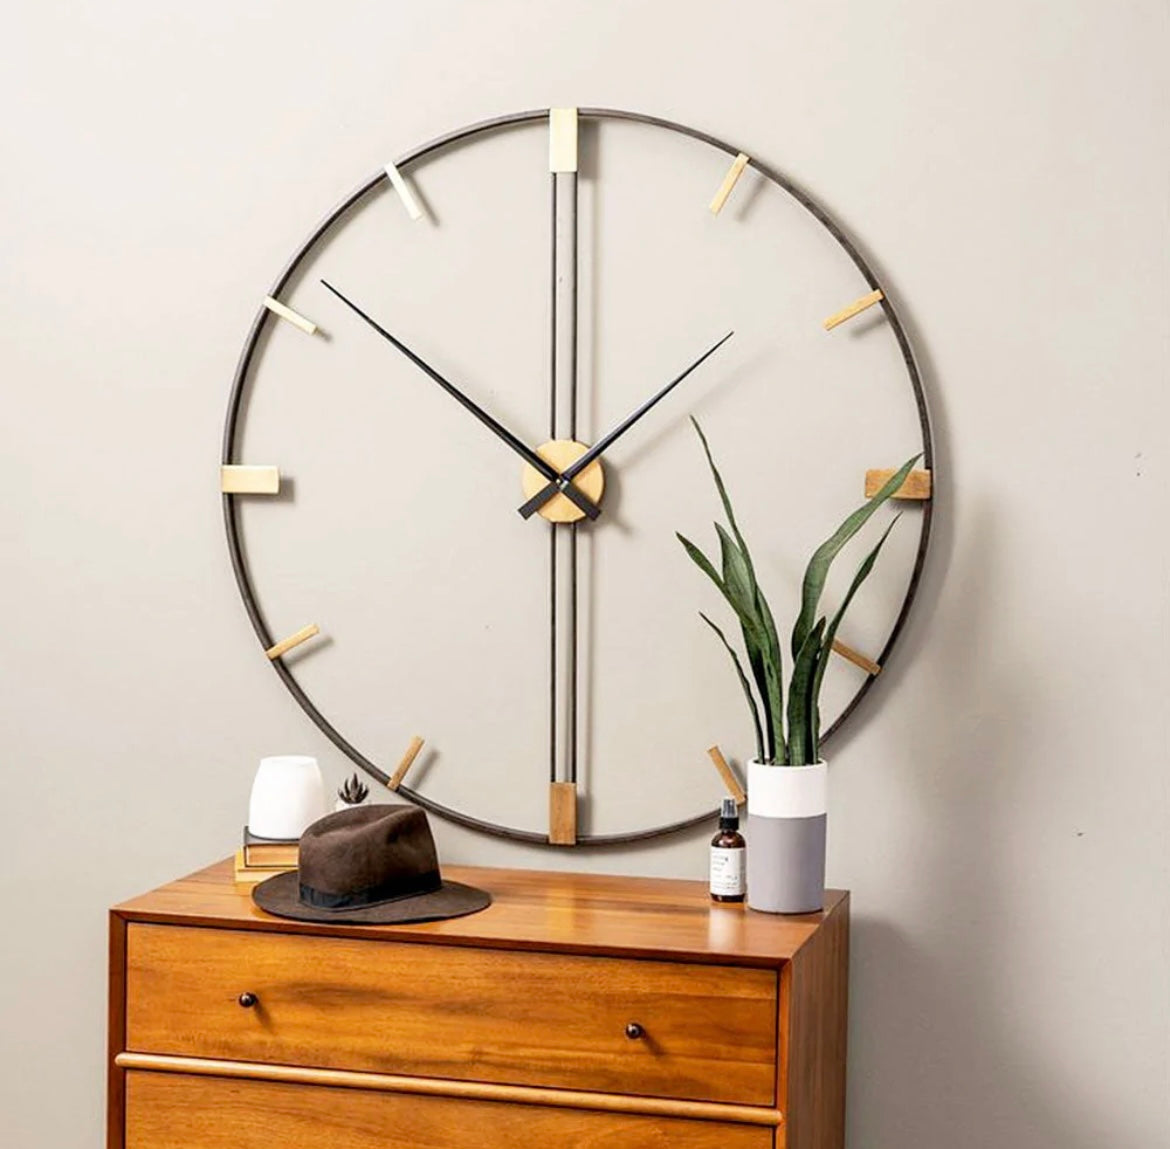 24-Inch Metal Wall Clock - Classic Black Vintage Pattern for Living Room, Bedroom, or Study